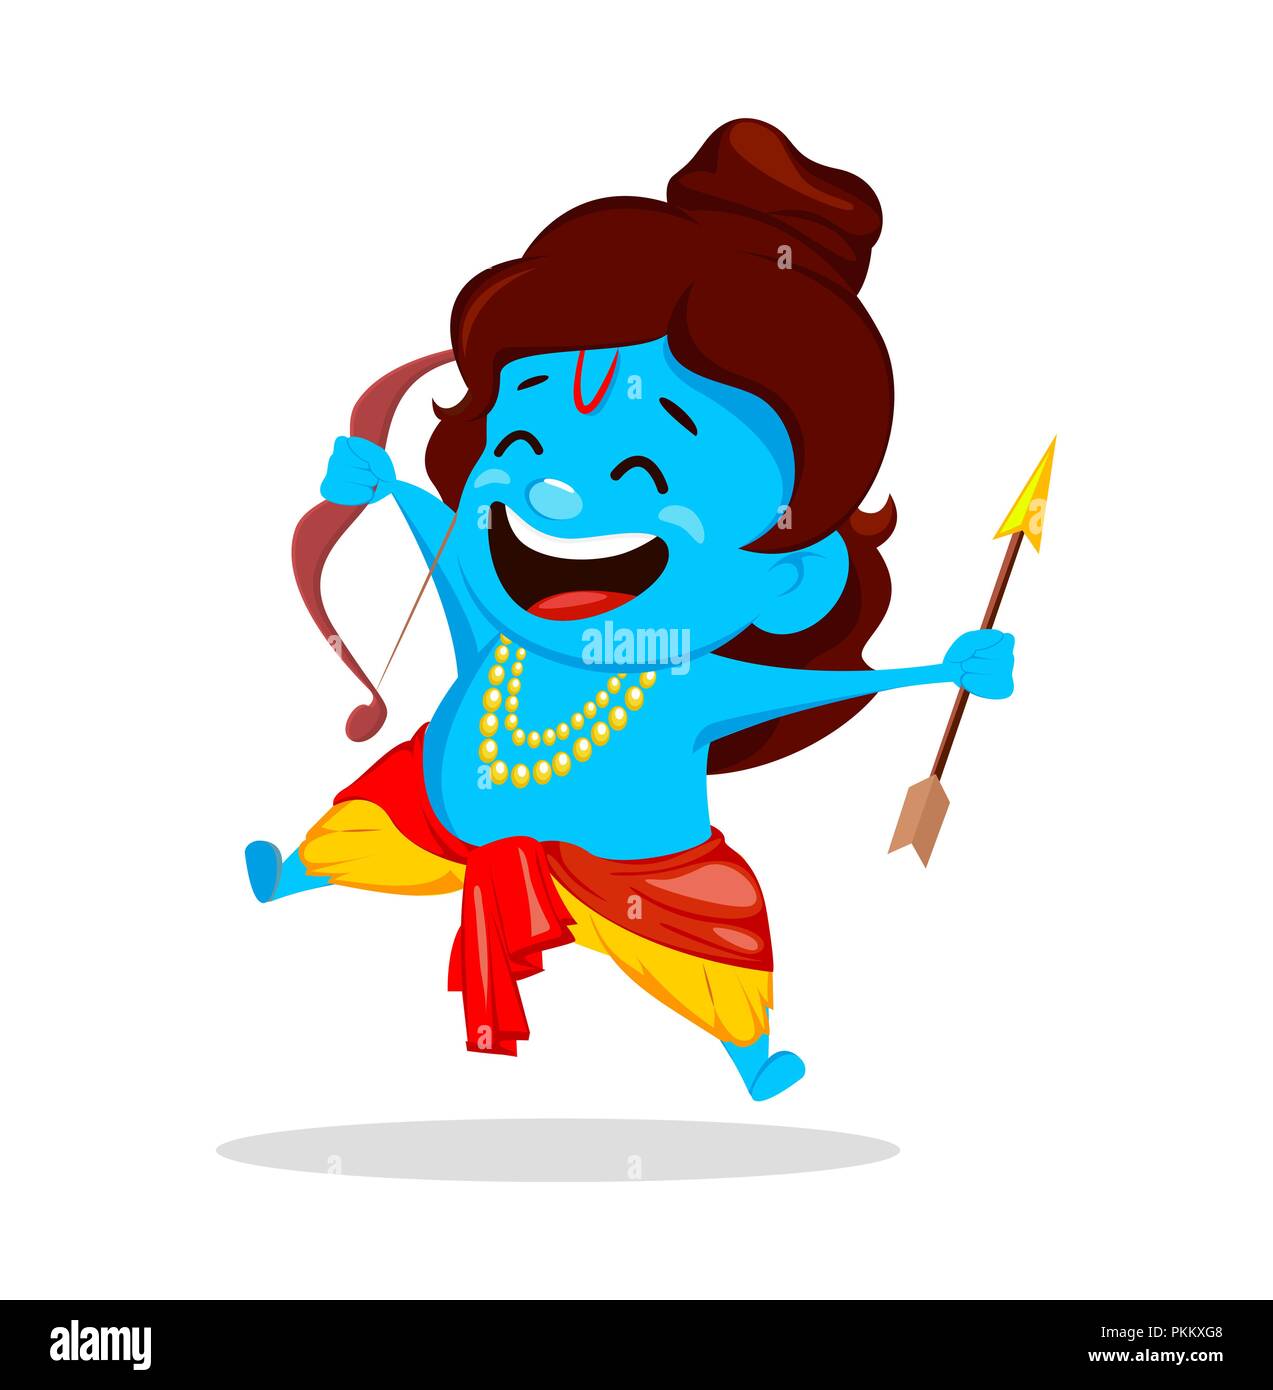 Lord Rama holding bow and arrow. Funny cartoon character for Navratri festival of India. Vector illustration on white background for traditional festi Stock Vector